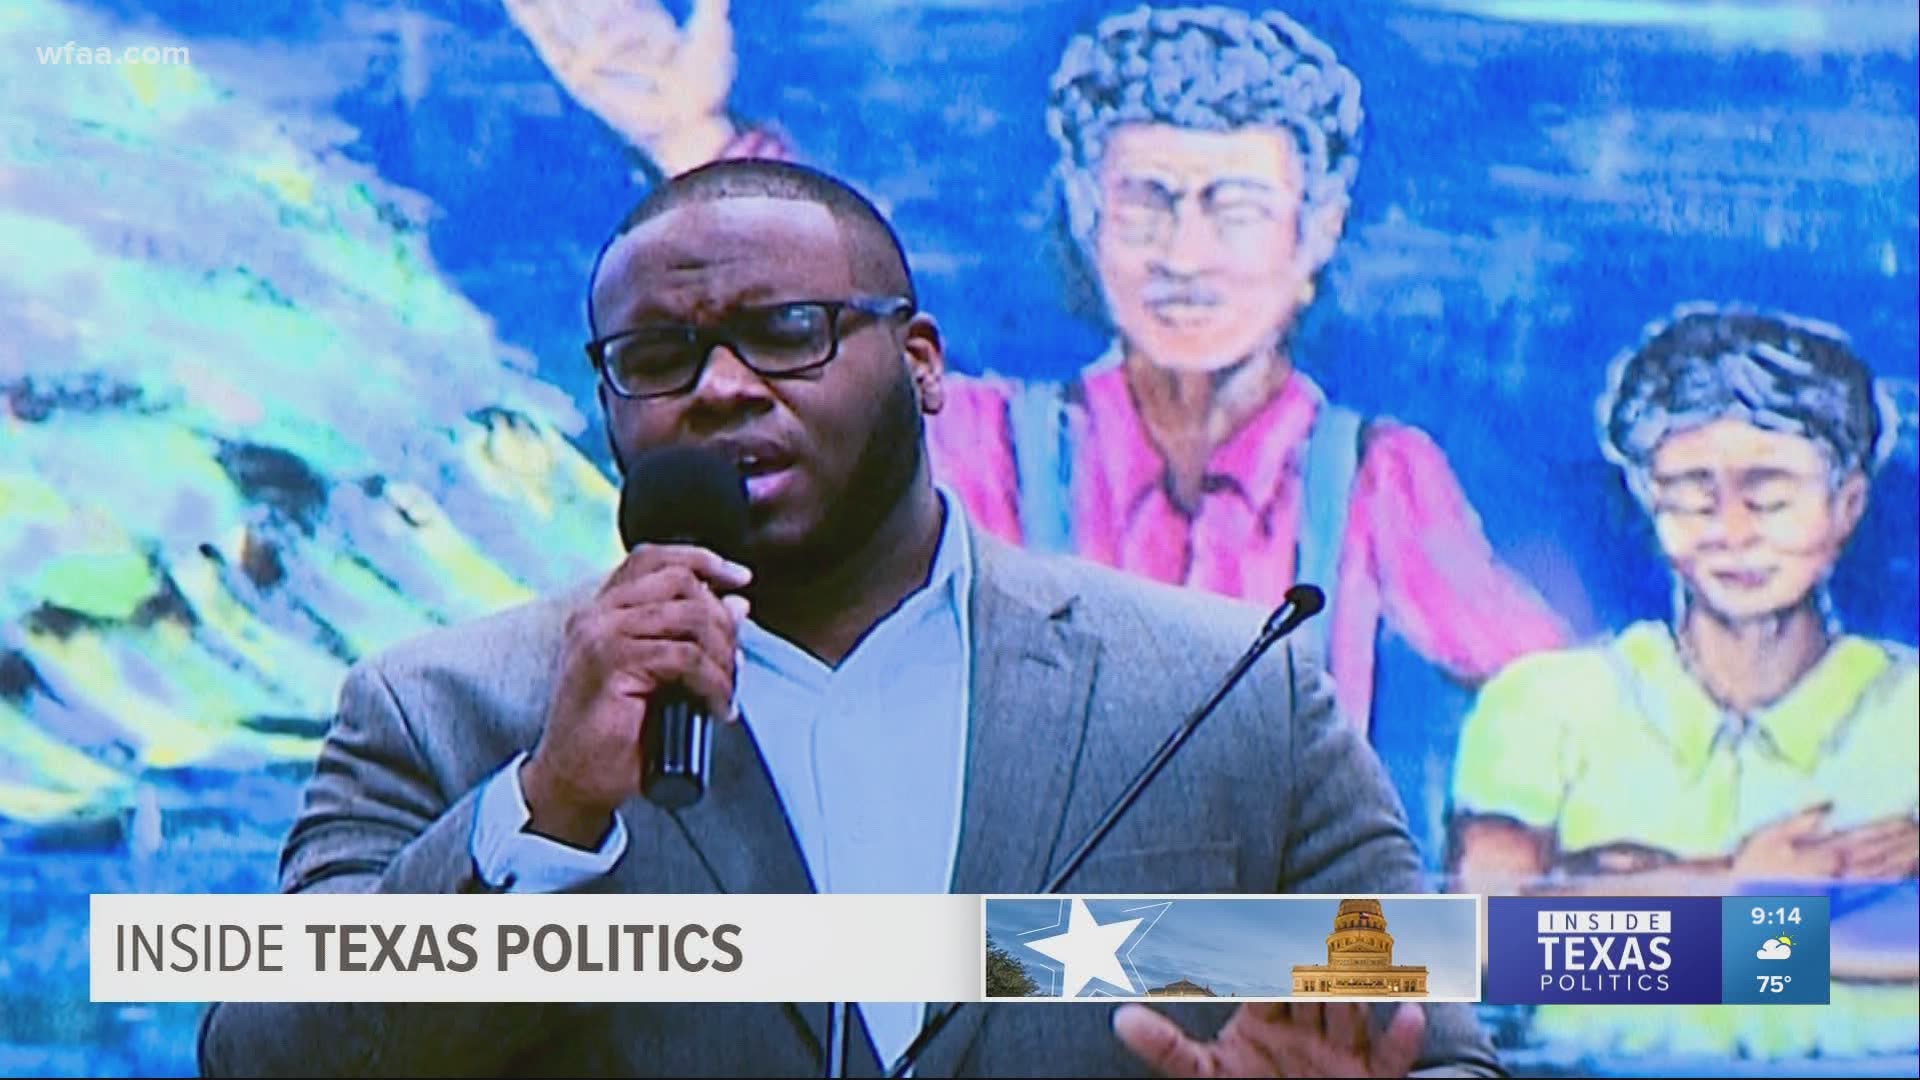 Texas Rep. Carl Sherman plans to introduce a police reform bill named Bo's Law. The bill is named after Botham Jean, a man who was killed by an officer in his home.